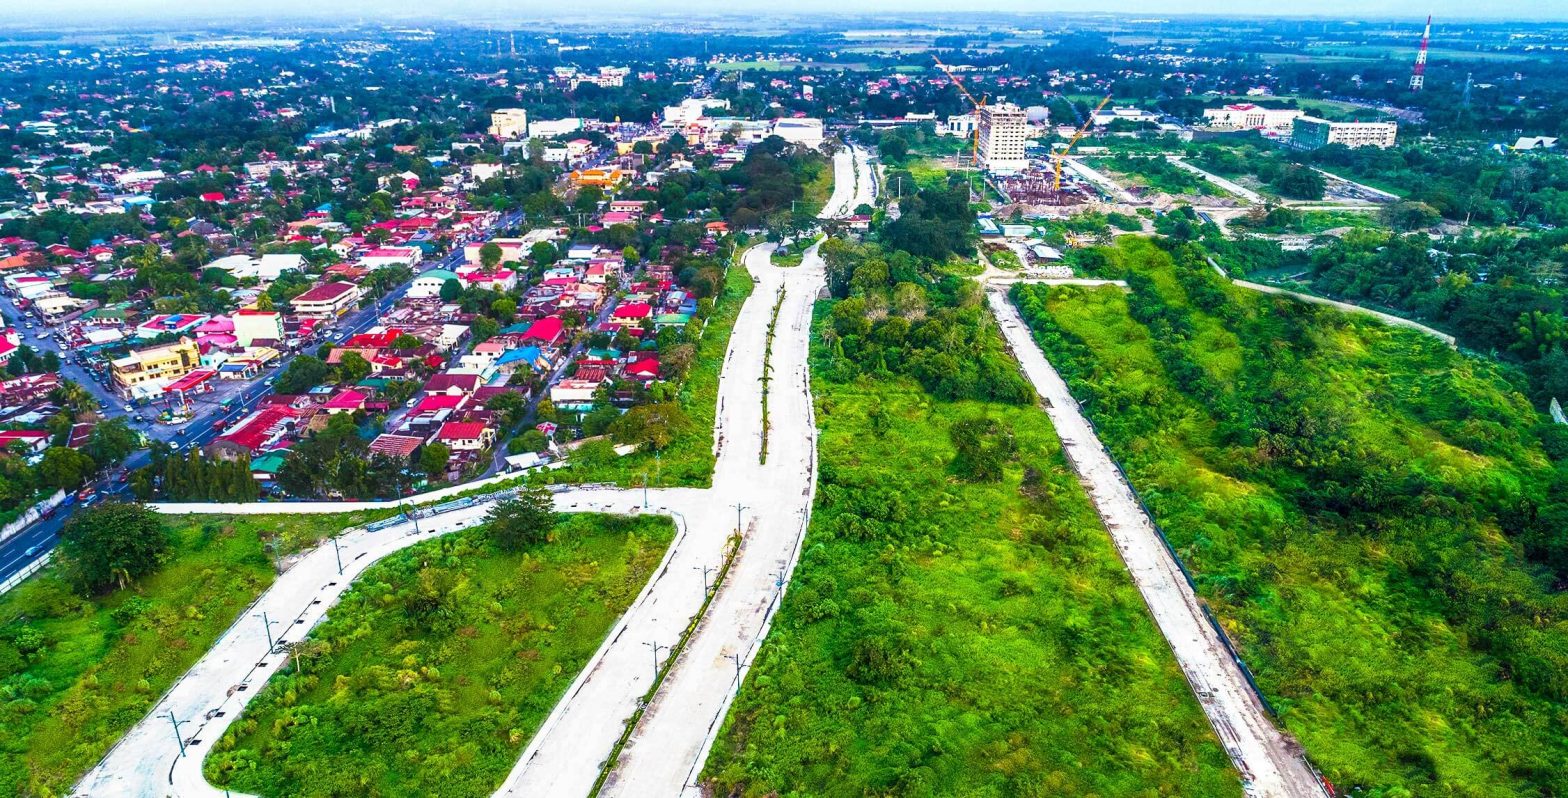 Ongoing developments inside the 34-hectare The Upper East township in Bacolod City where the company plans to build more office towers, malls, and residential towers in the next 5 years.